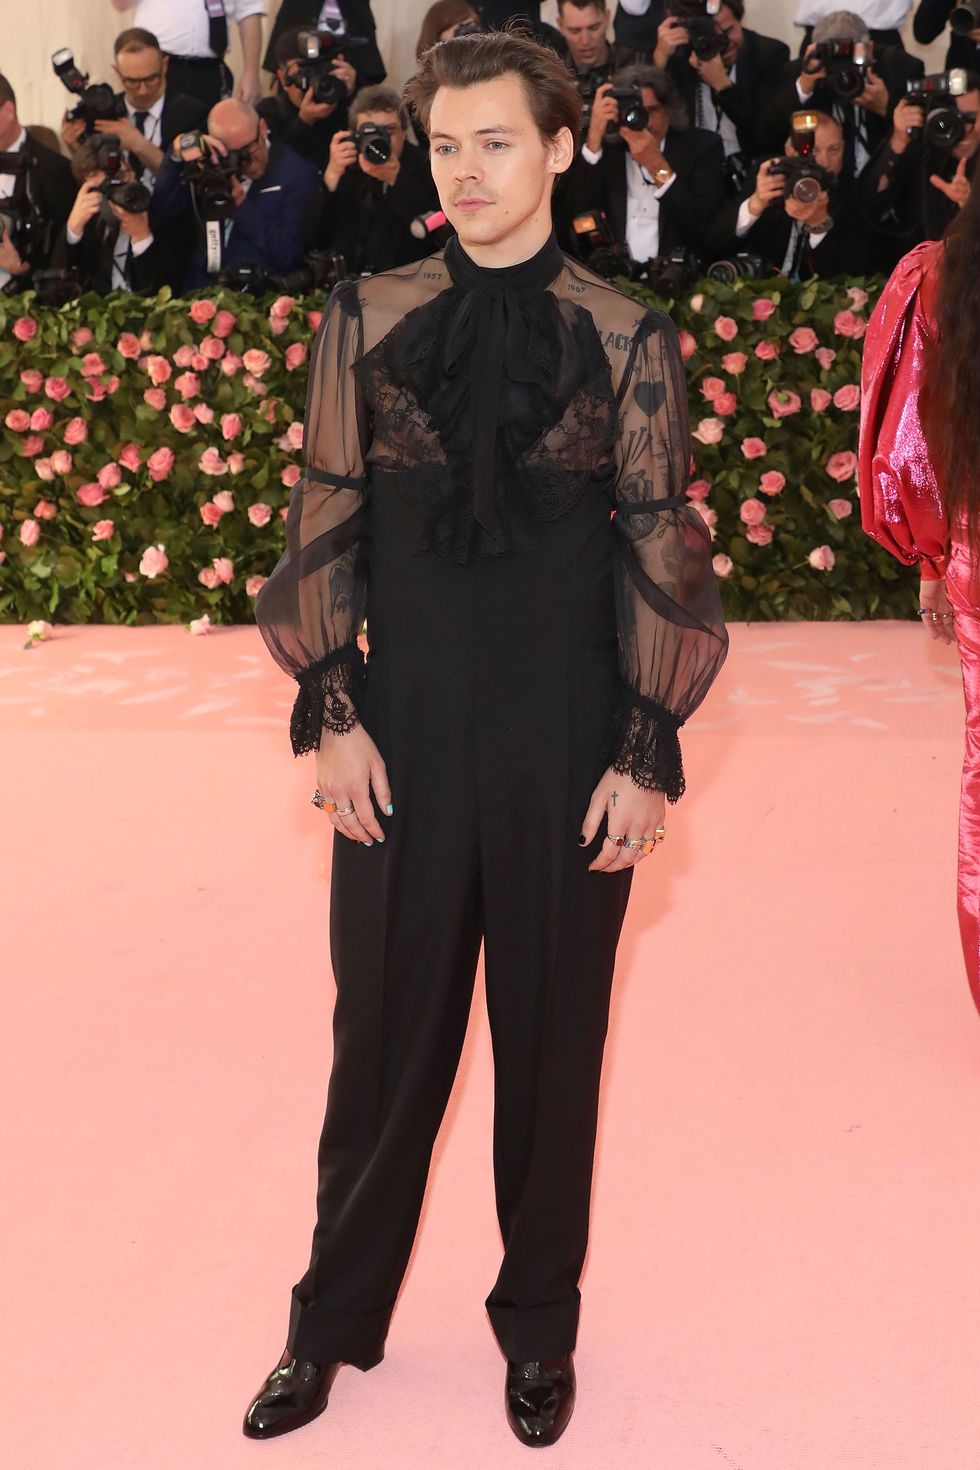 new york, ny   may 06  harry styles attends the 2019 met gala celebrating camp notes on fashion at the metropolitan museum of art on may 6, 2019 in new york city  photo by taylor hillfilmmagic